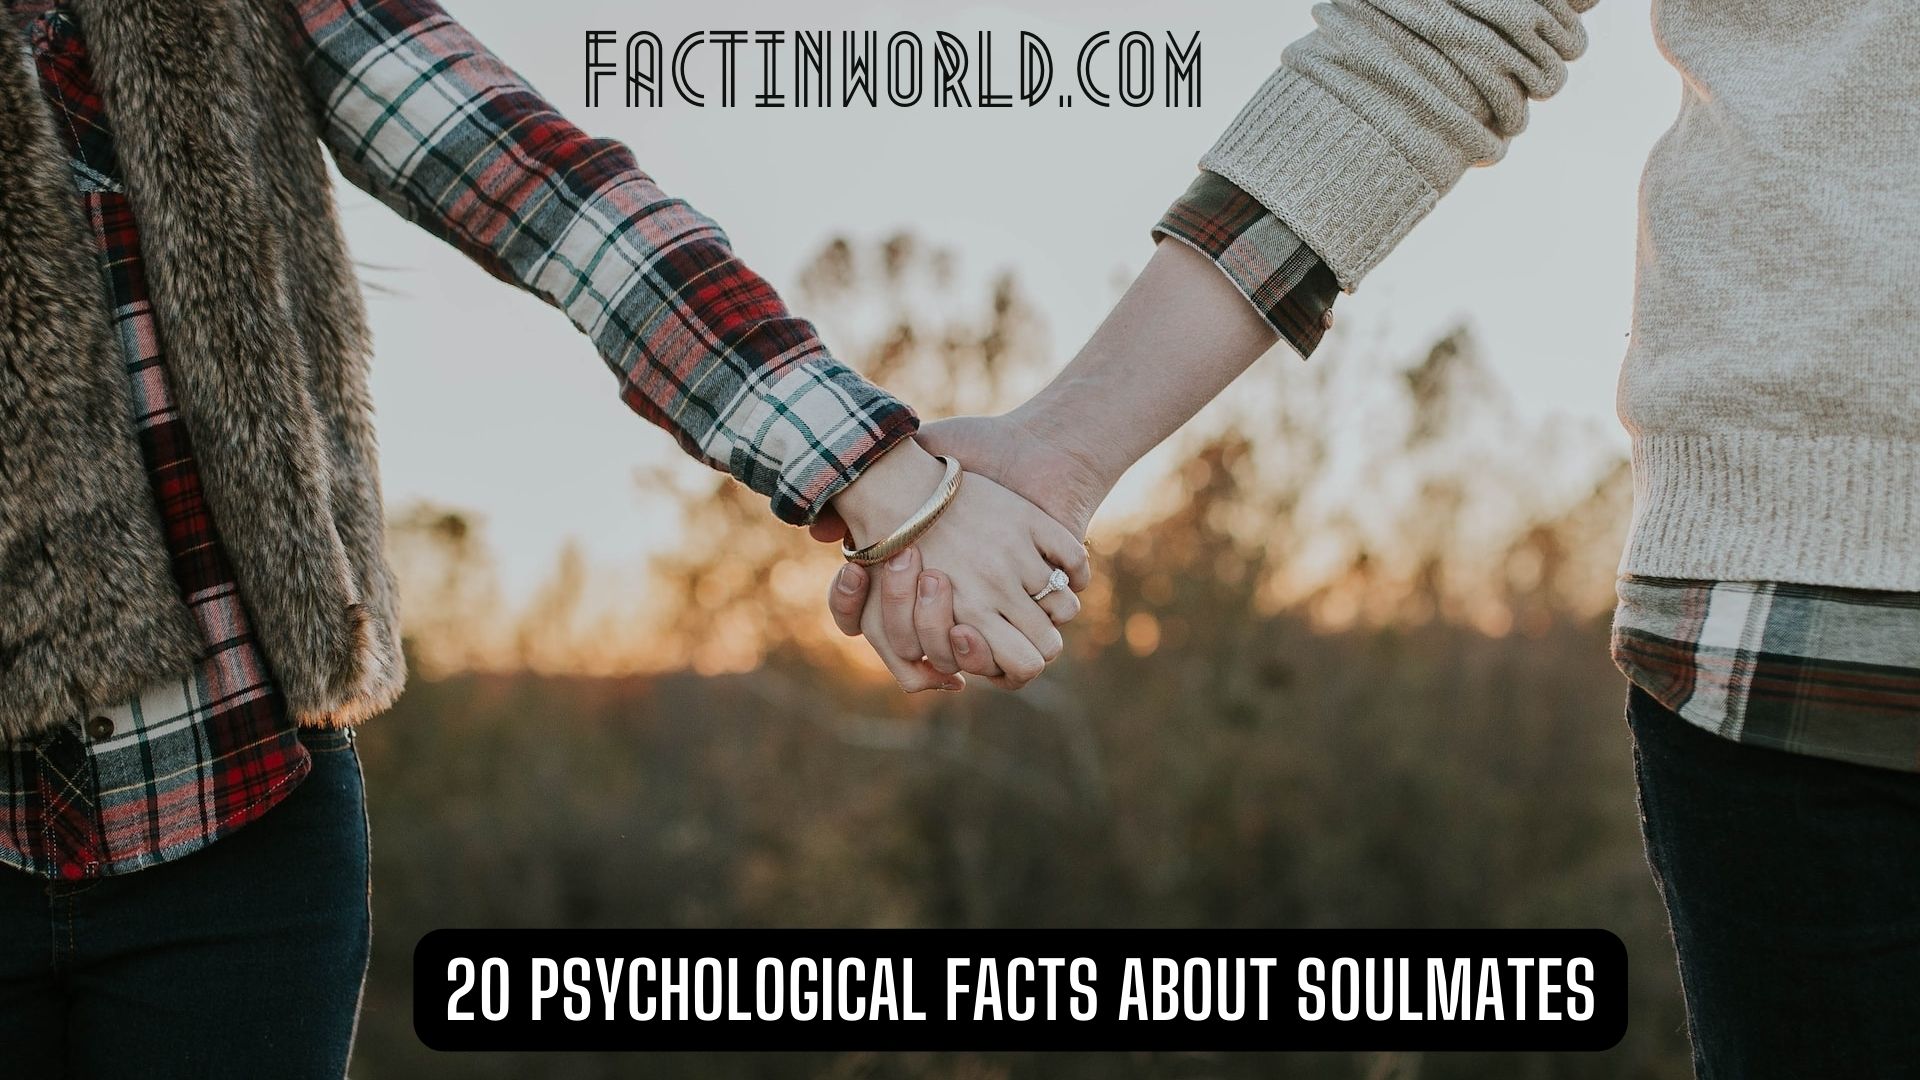 The 20 Fascinating Psychological Facts About Soulmates